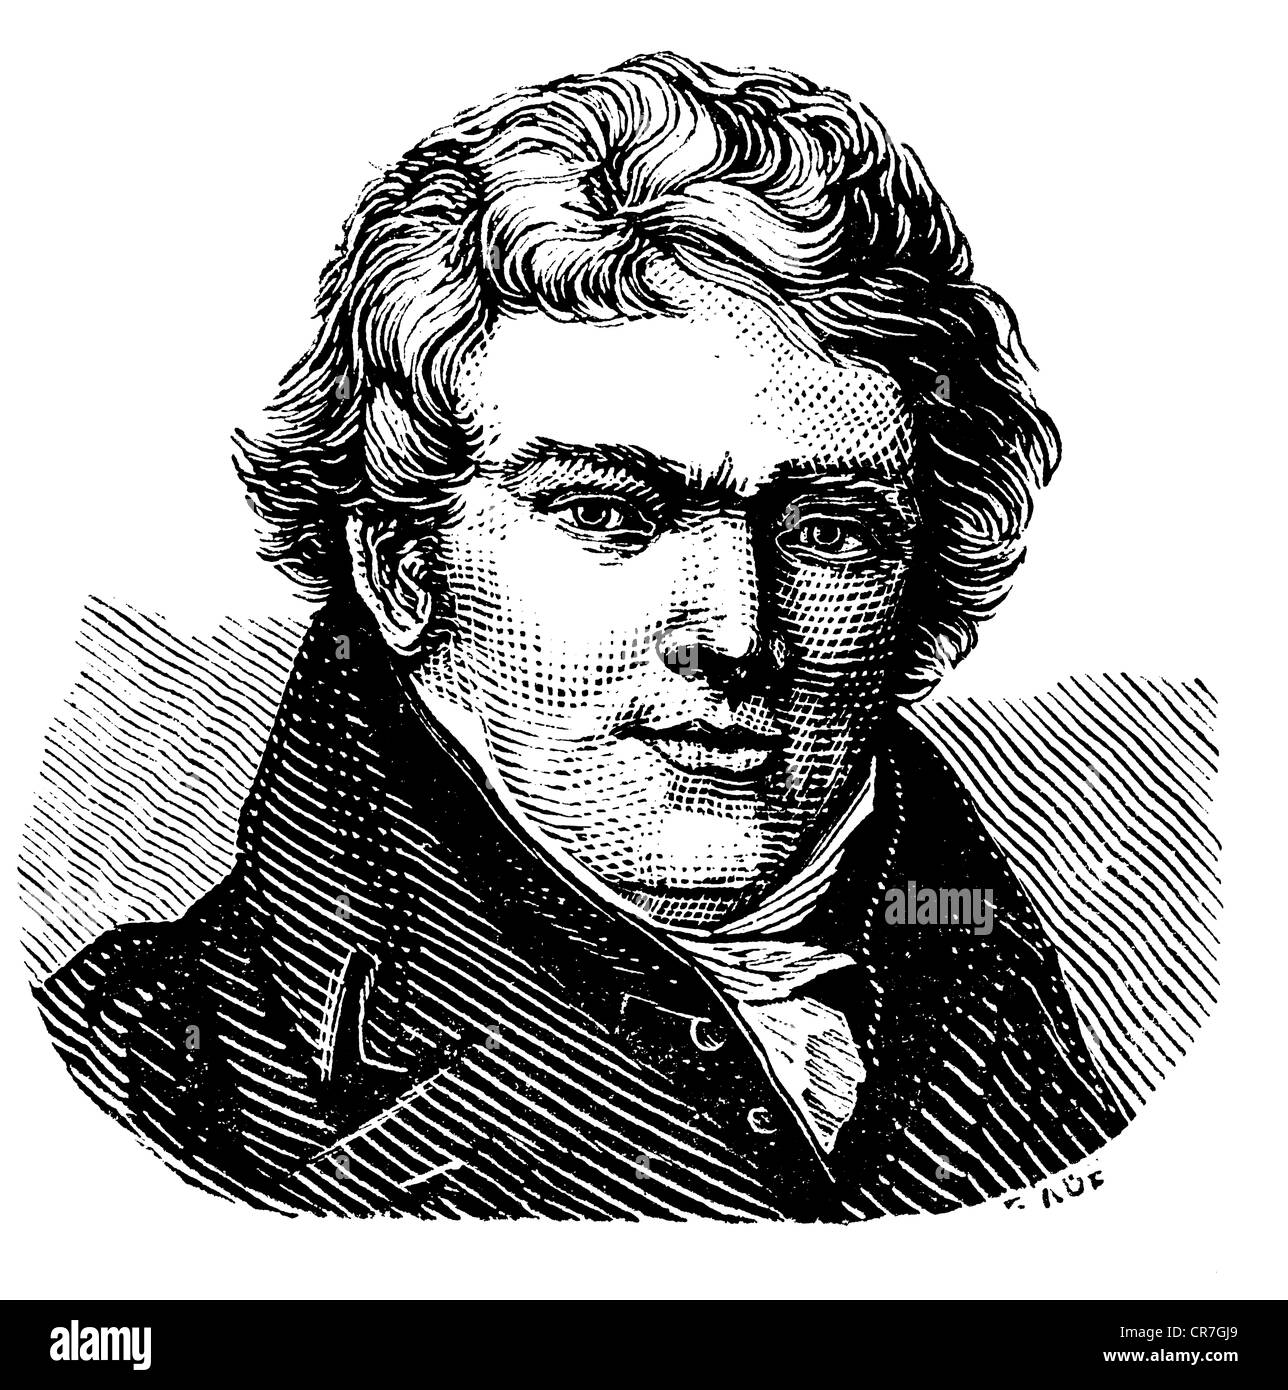 Senefelder, Alois, 6.11.1771 - 26.2.1834, Auastrian inventor of the lithography, portrait, illustration / wood engraving from: 'The world in illustrations', published by the author Dr. Chr. G. Hottinger, Strasbourg / Alsace, 1881, , Stock Photo